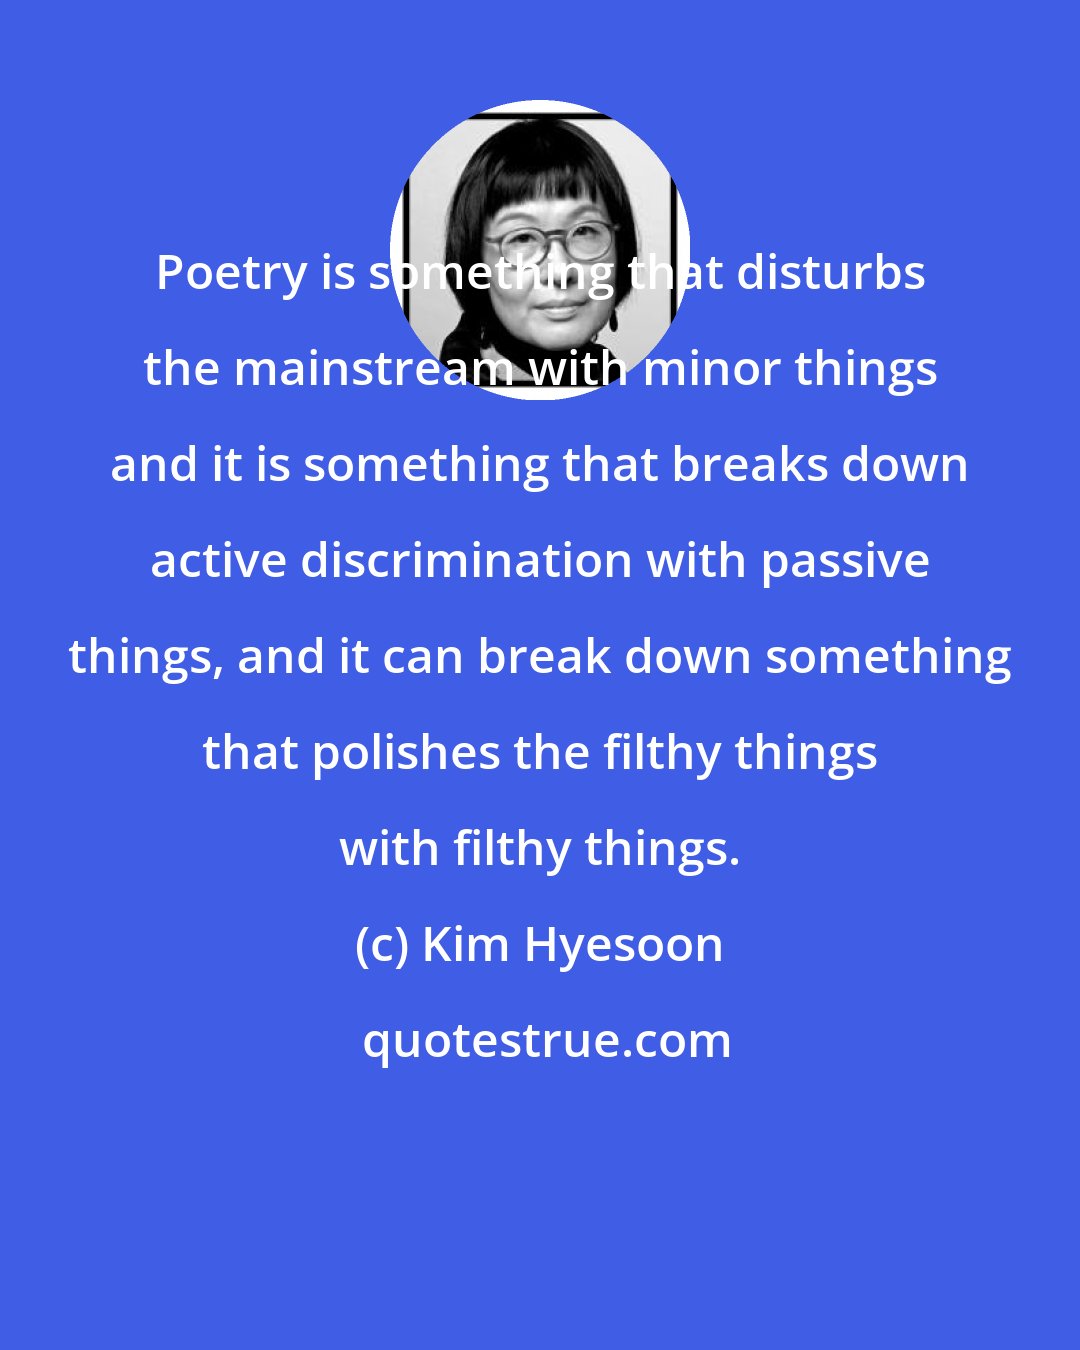 Kim Hyesoon: Poetry is something that disturbs the mainstream with minor things and it is something that breaks down active discrimination with passive things, and it can break down something that polishes the filthy things with filthy things.